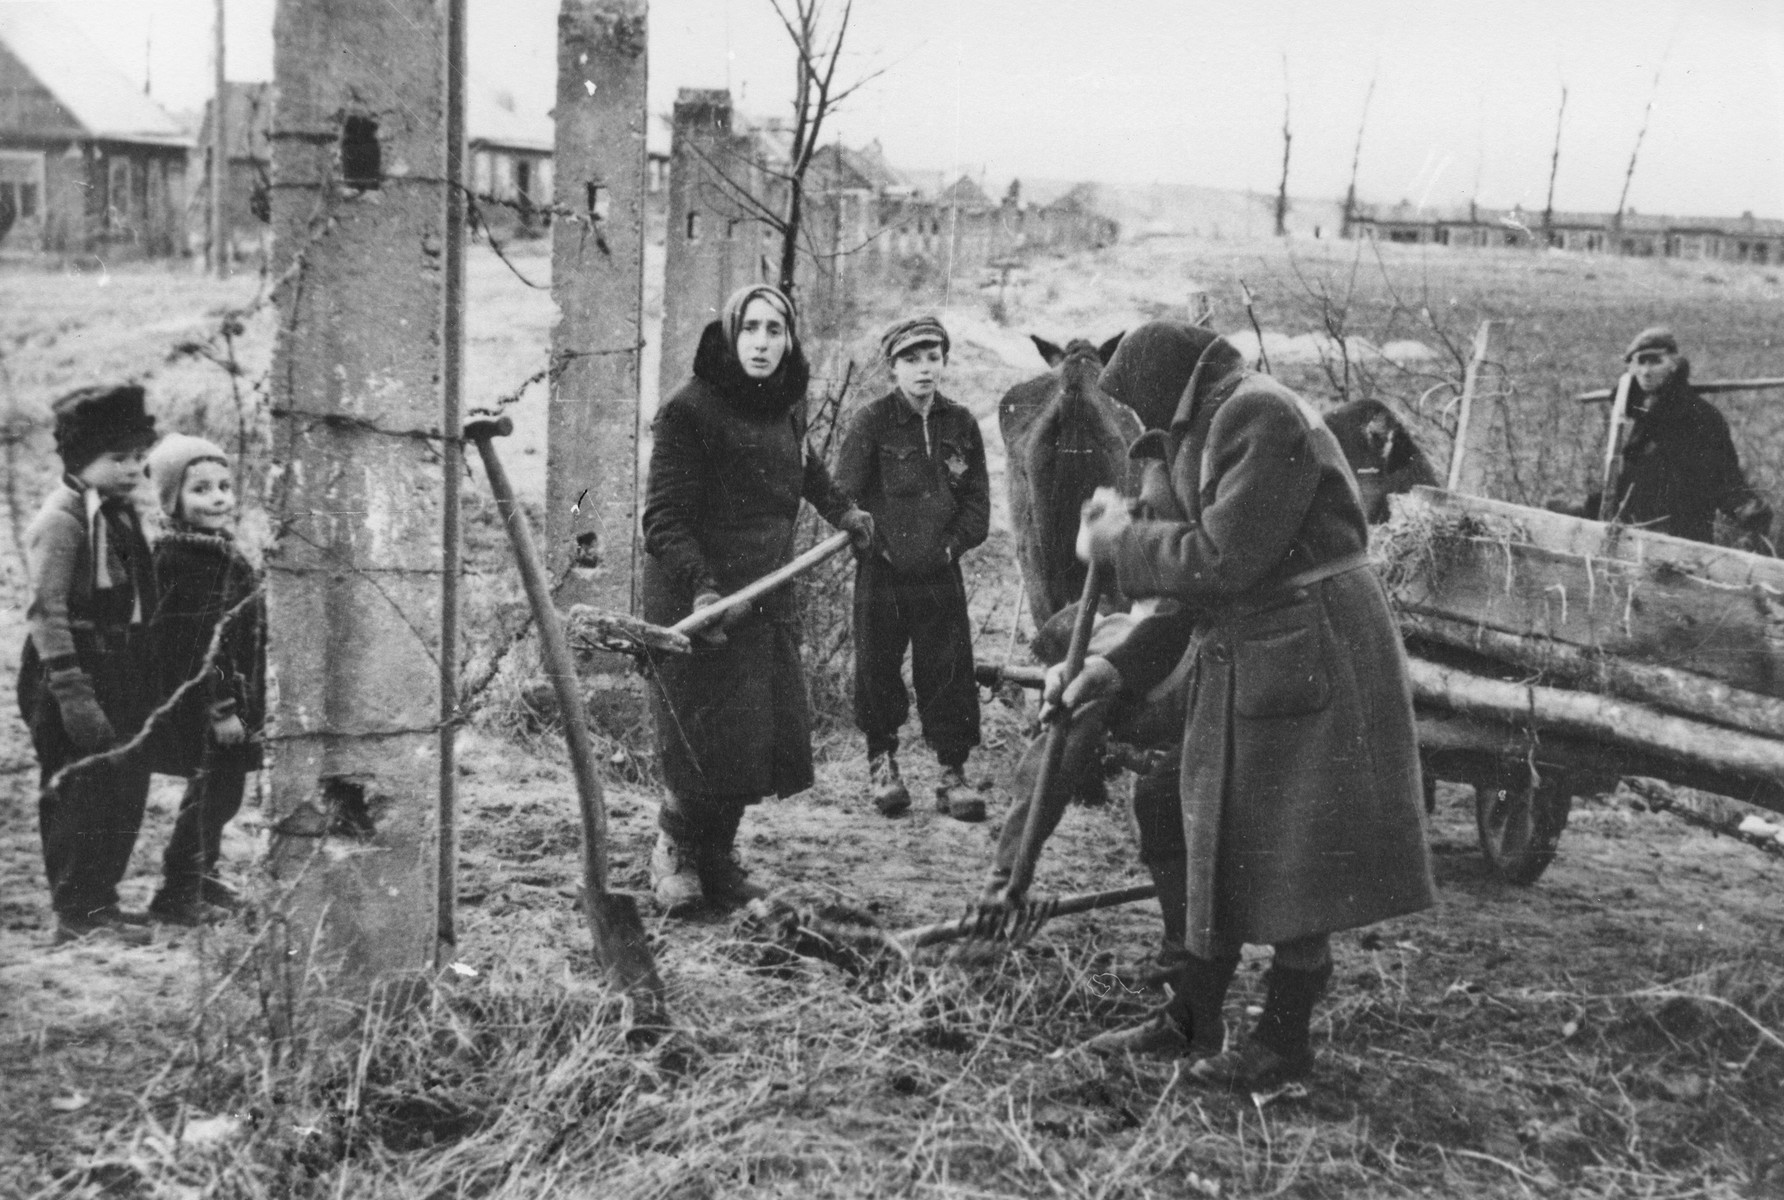 Jewish women working on an agricultural plot in the Kovno ghetto.